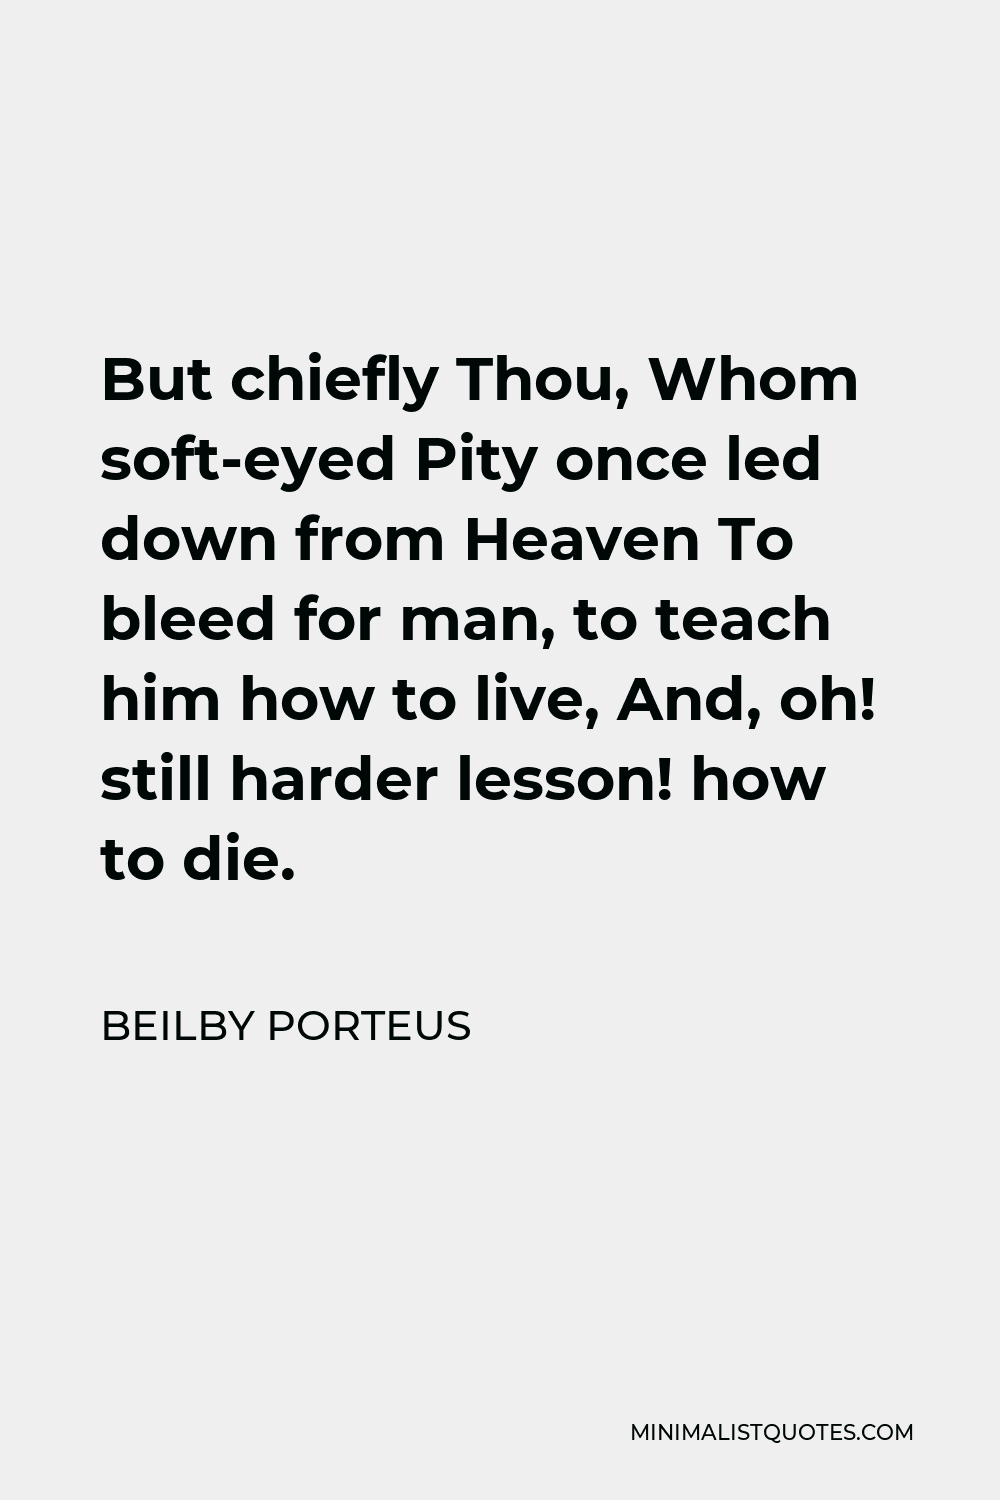 Beilby Porteus Quote - But chiefly Thou, Whom soft-eyed Pity once led down from Heaven To bleed for man, to teach him how to live, And, oh! still harder lesson! how to die.